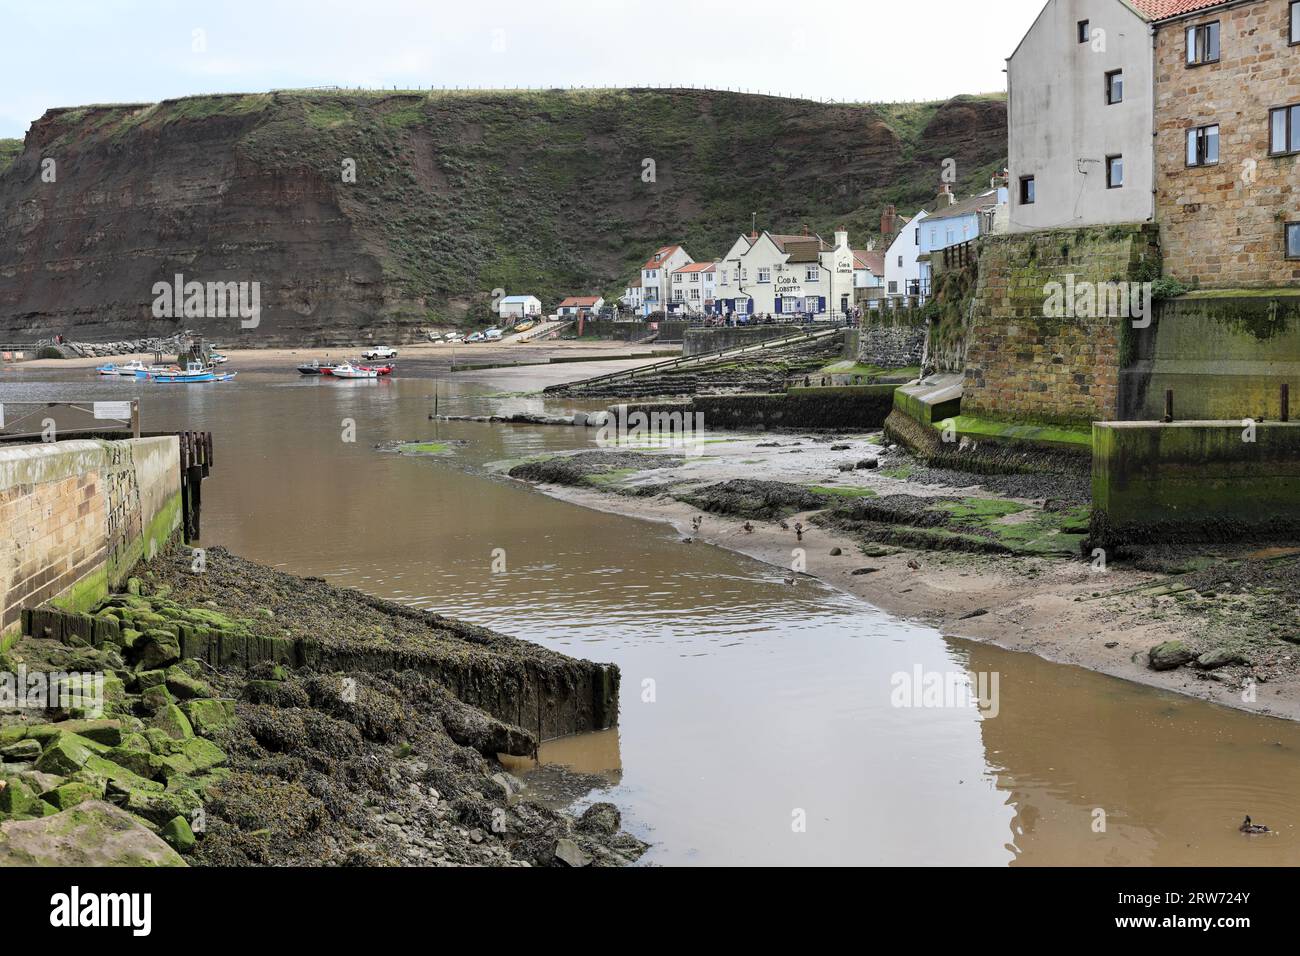 Staithes Harbour and the Cod and Lobster Pub, North Yorkshire, UK Stock Photo